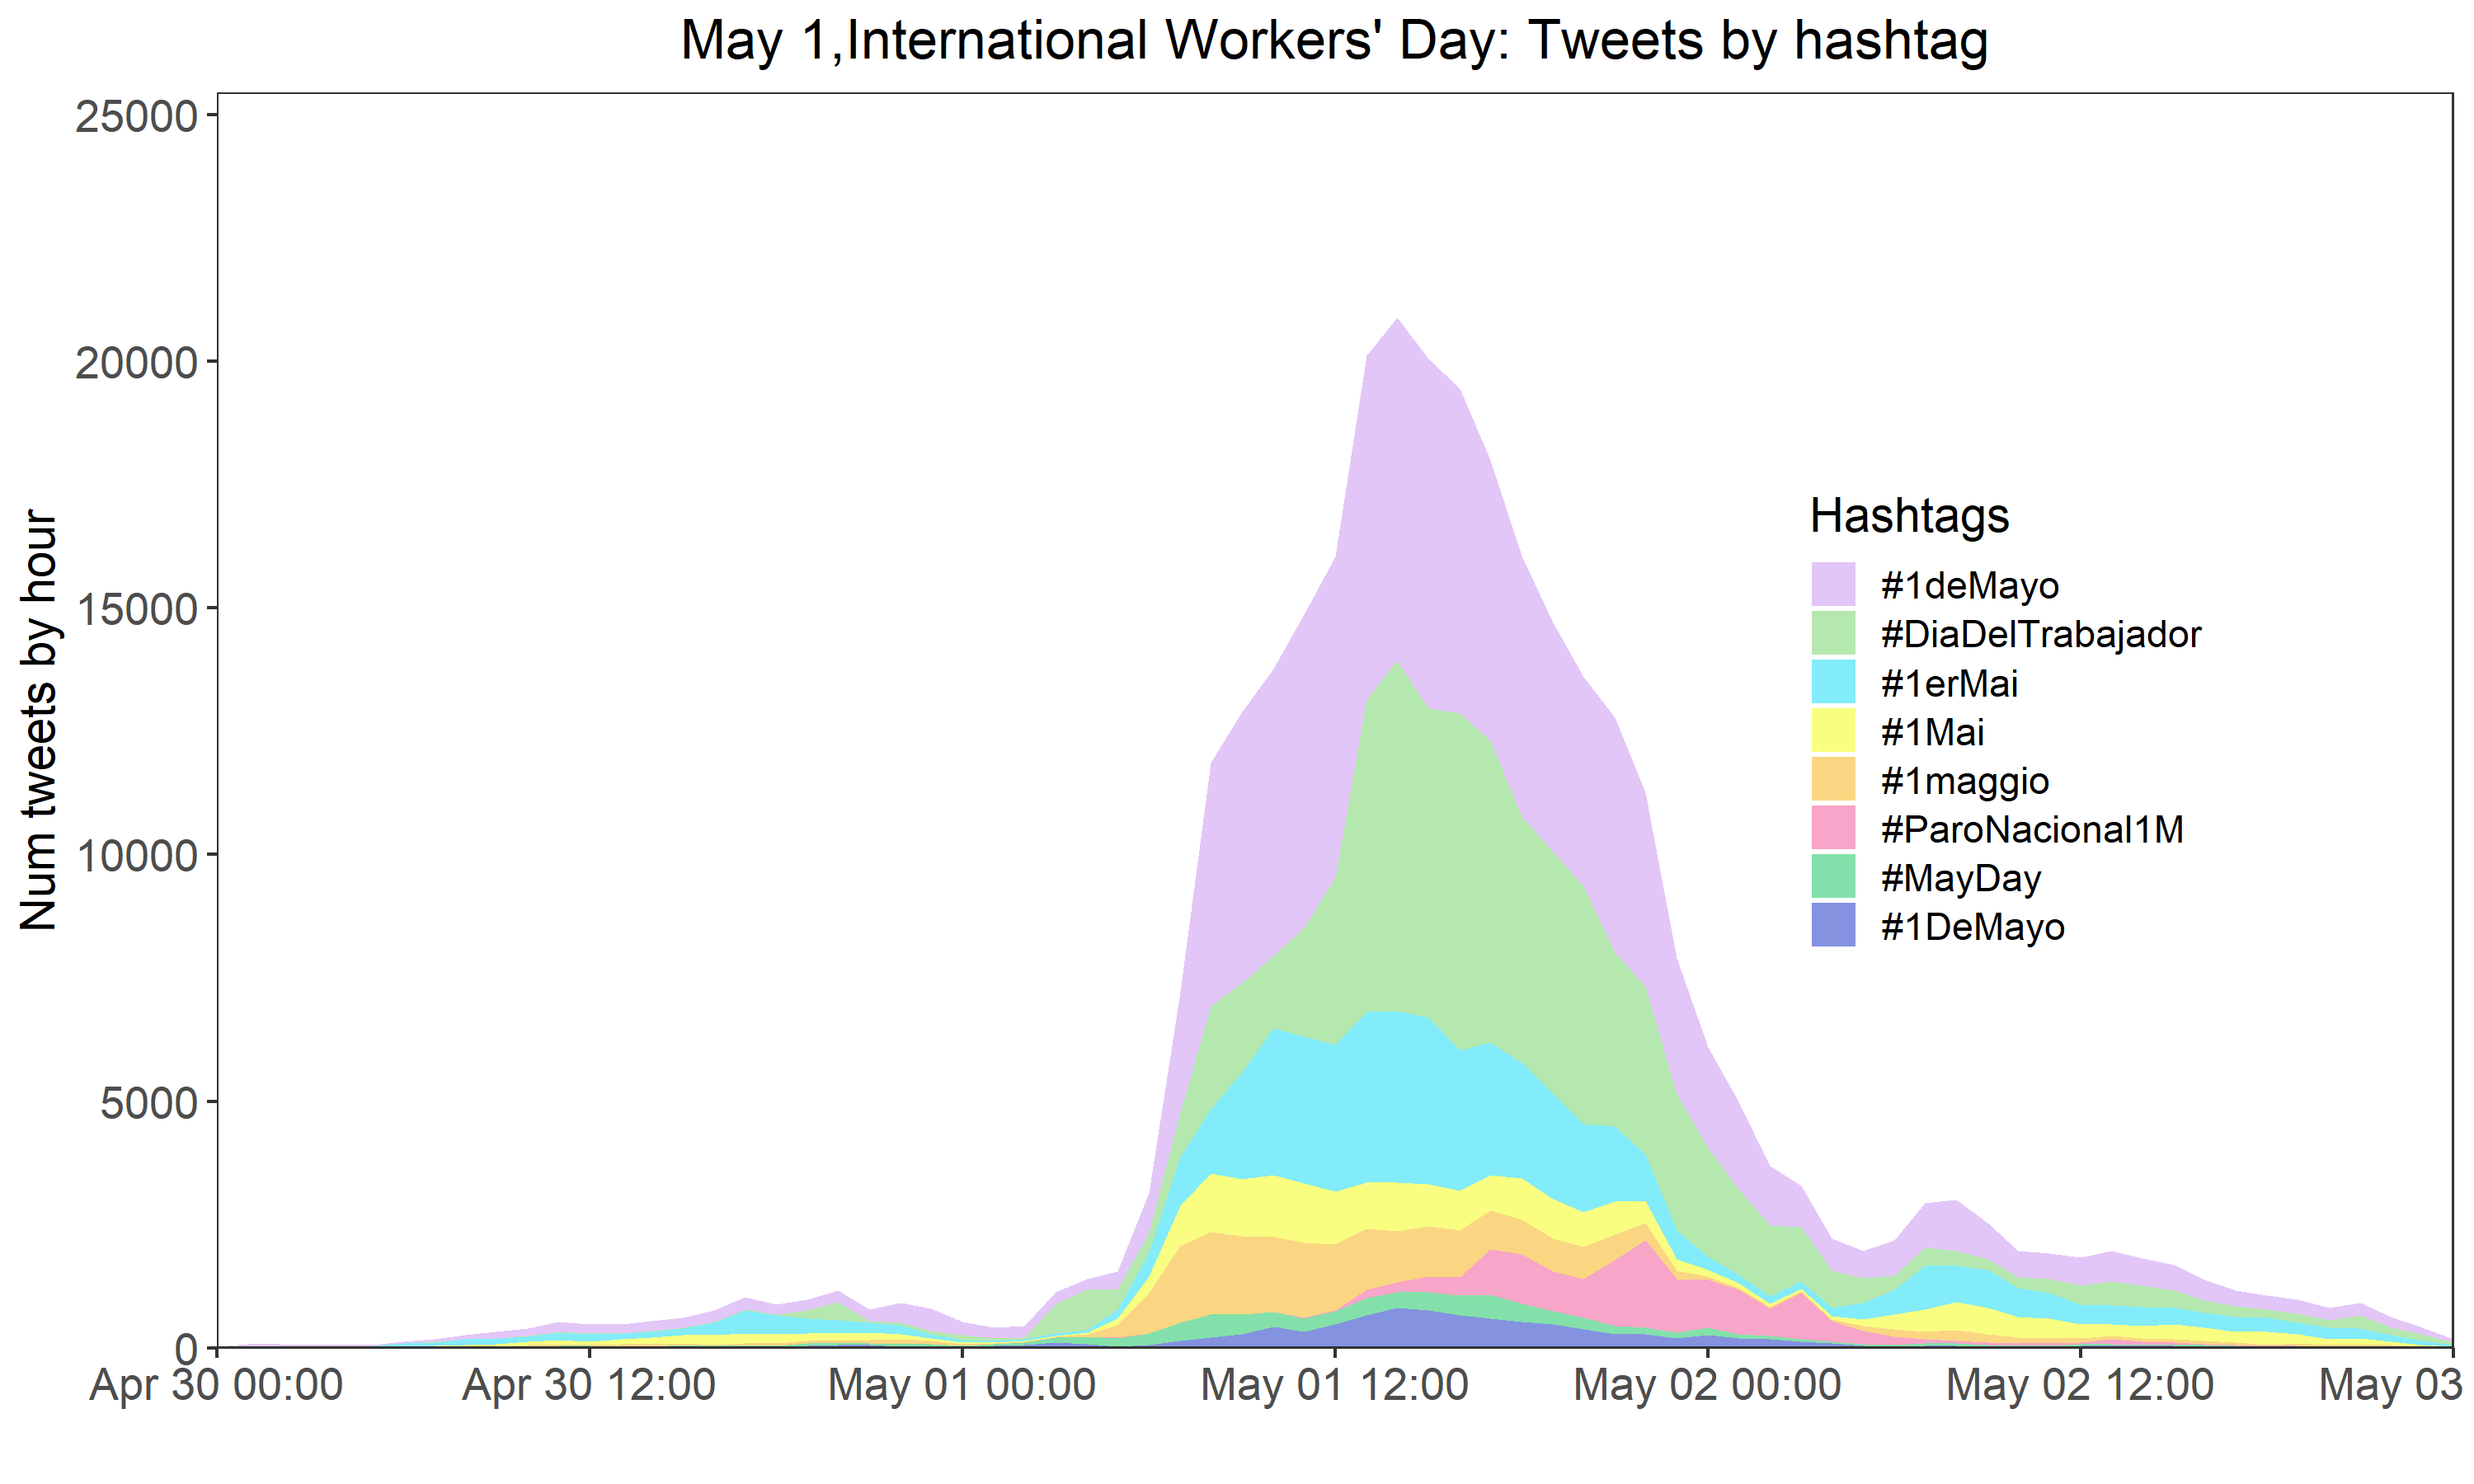 FIG. 8 PRESENCE OF HASHTAGS IN TWEETS